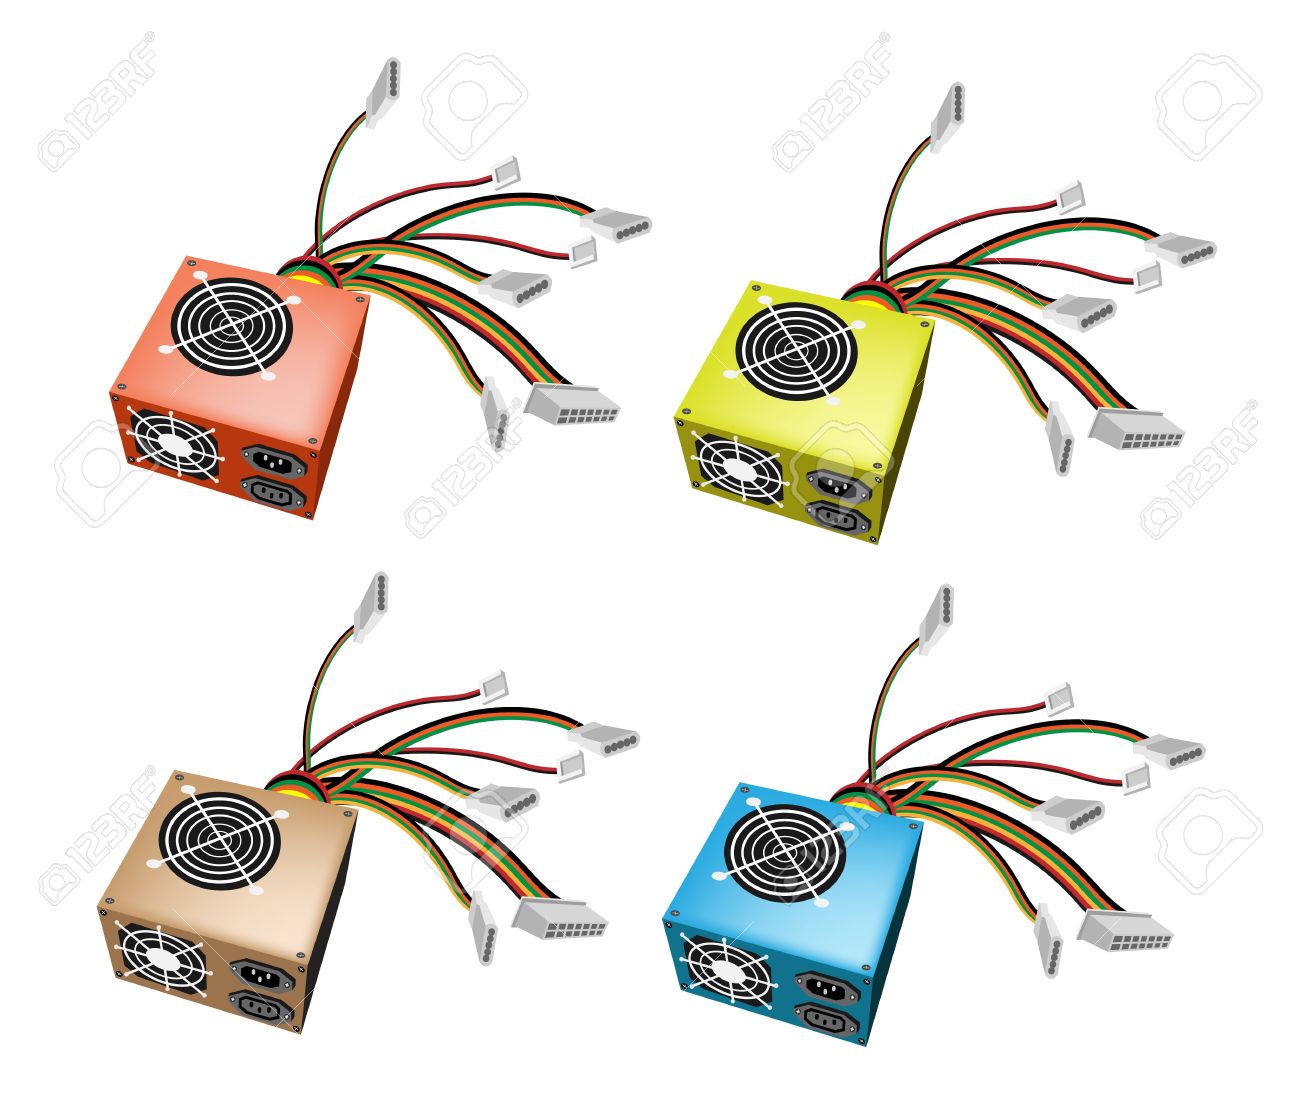 Power supply clipart.